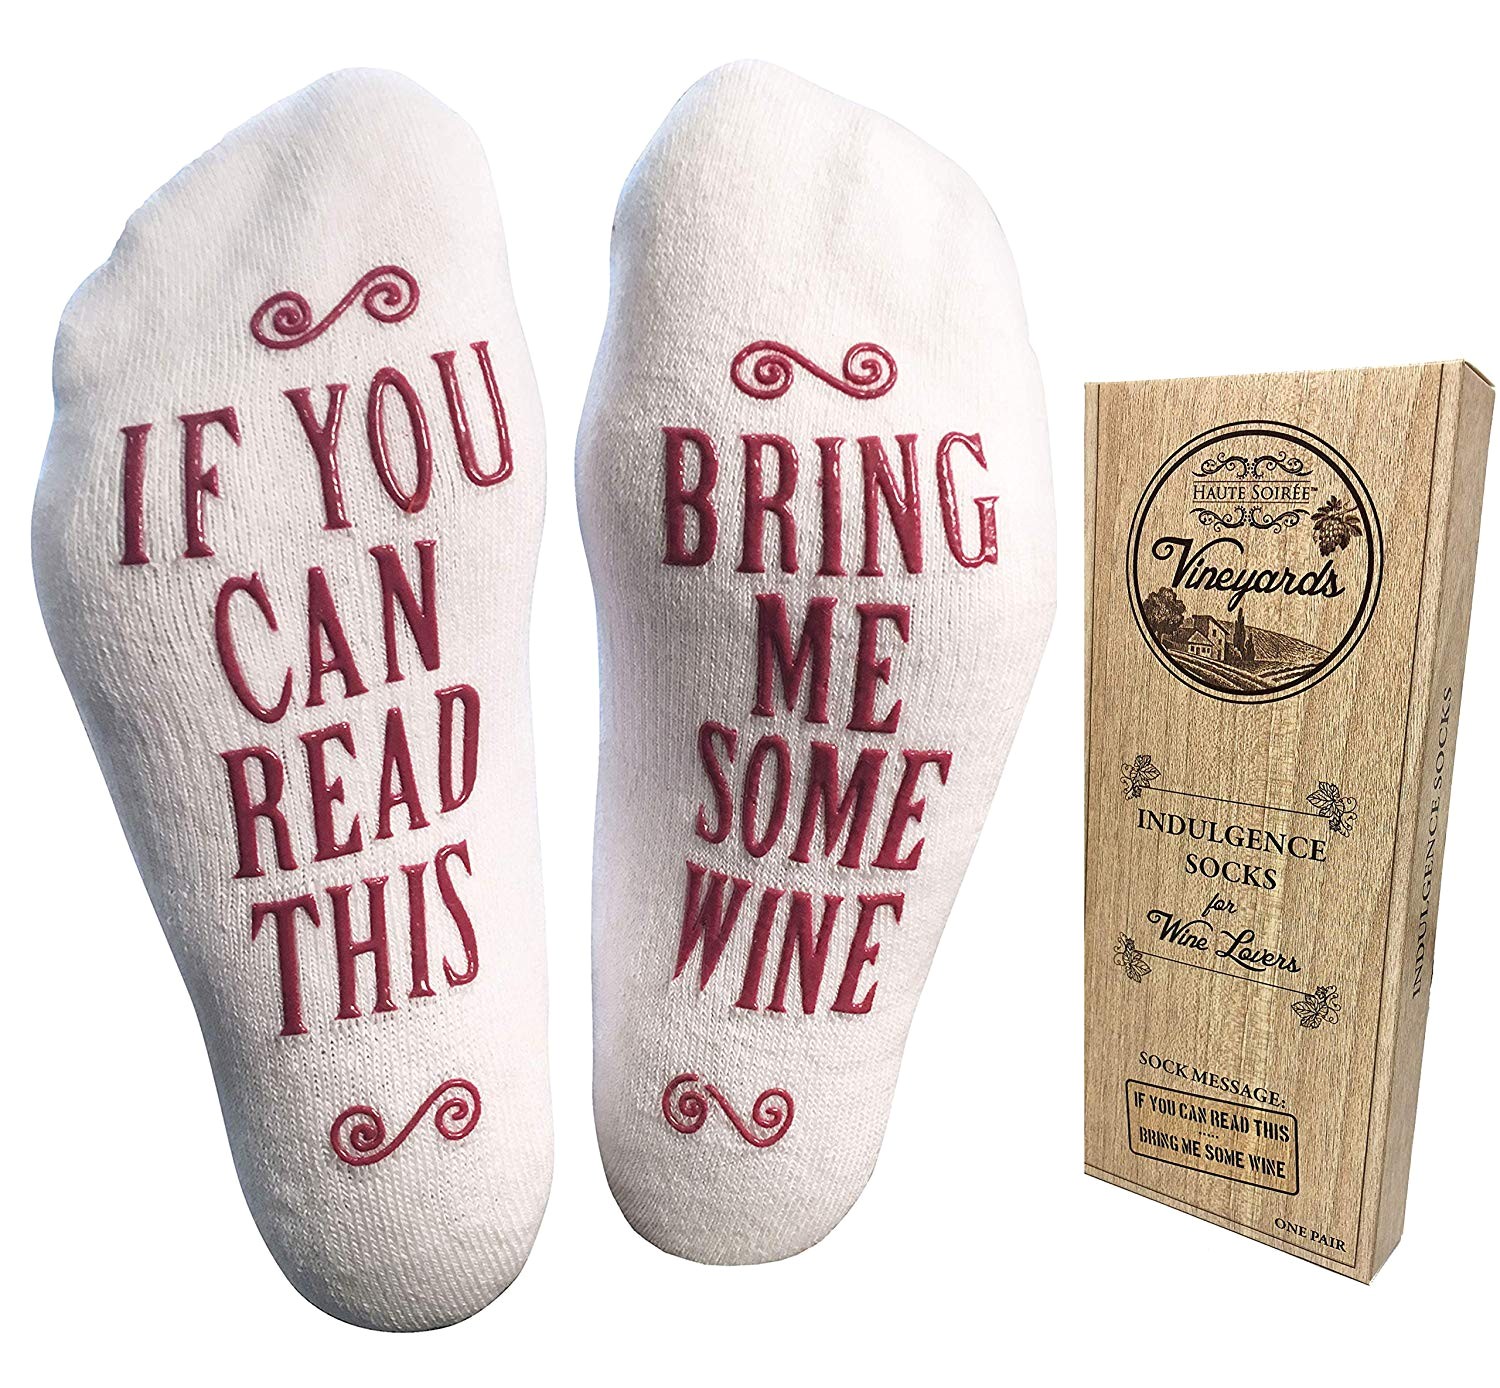 Sugar and Cotton Wine socks Amazon Com Bring Me some Wine Luxury Combed Cotton socks with